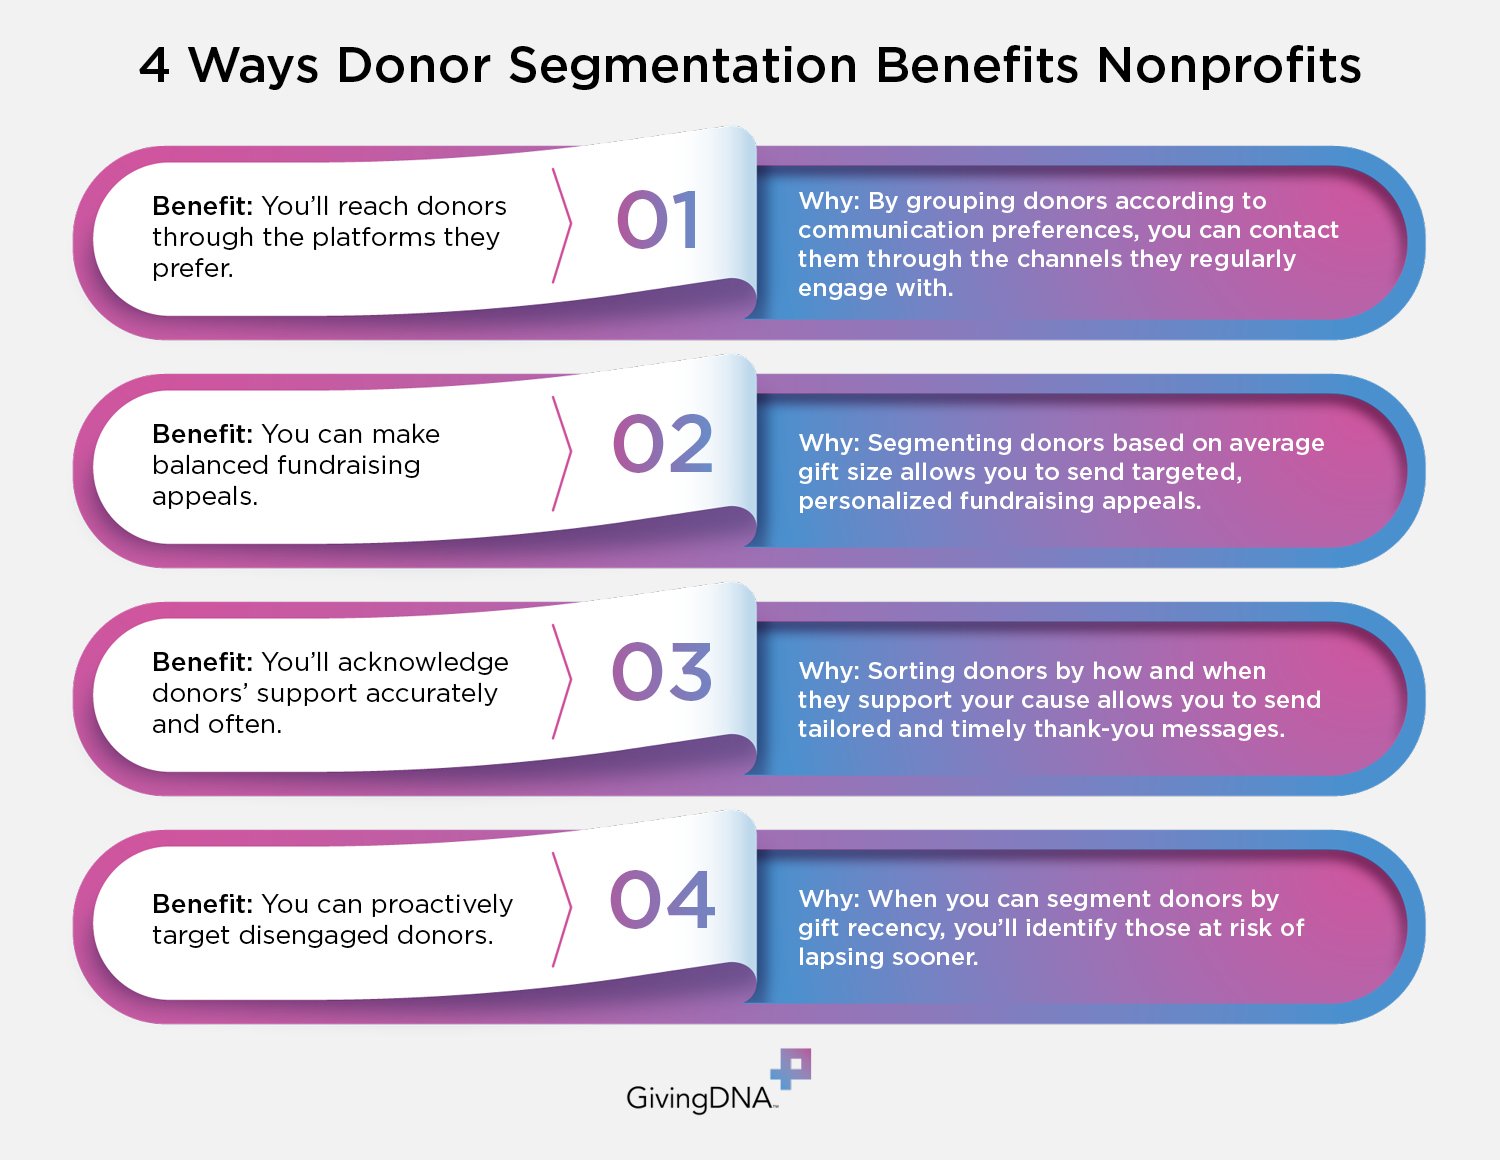 These are the benefits of donor segmentation (explained in text below).